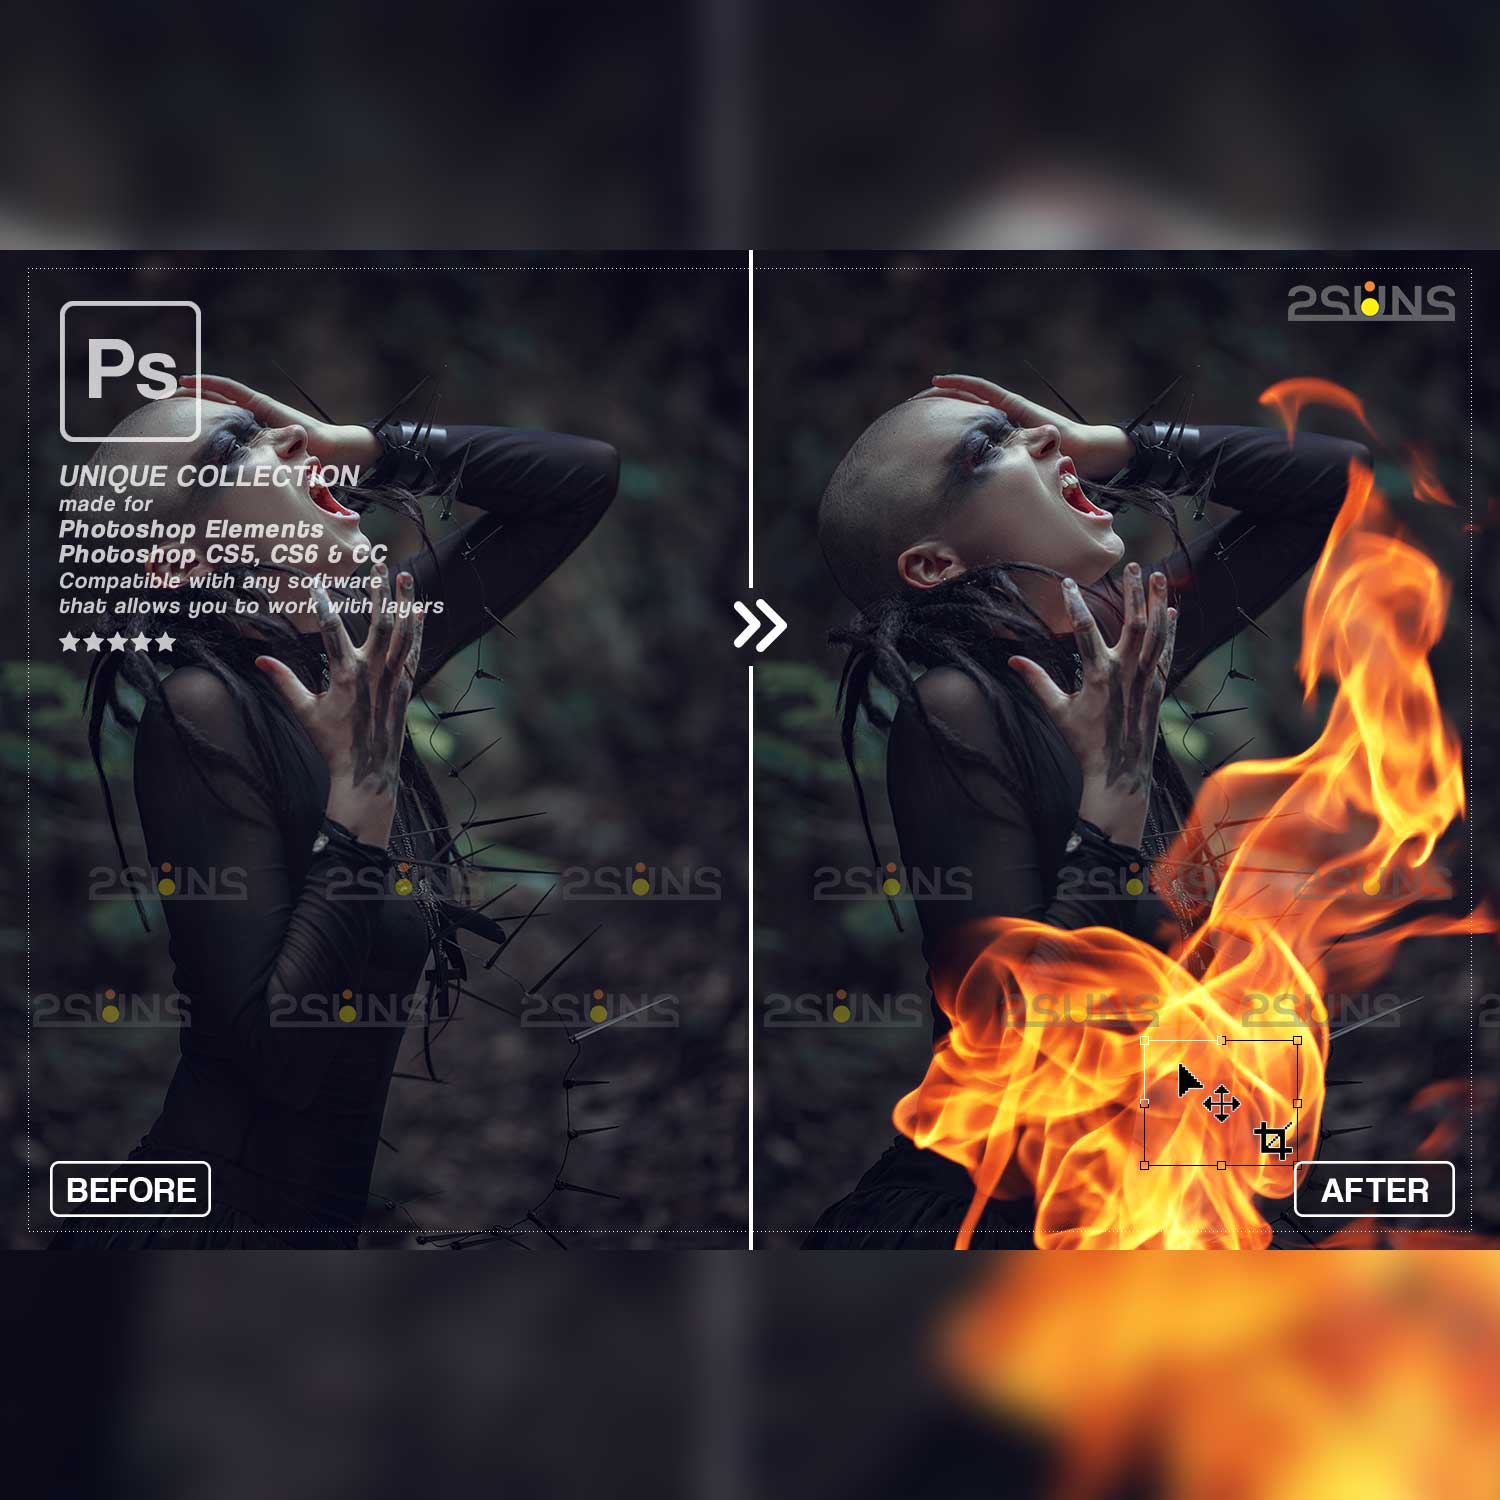 Photoshop Fire Overlays cover image.